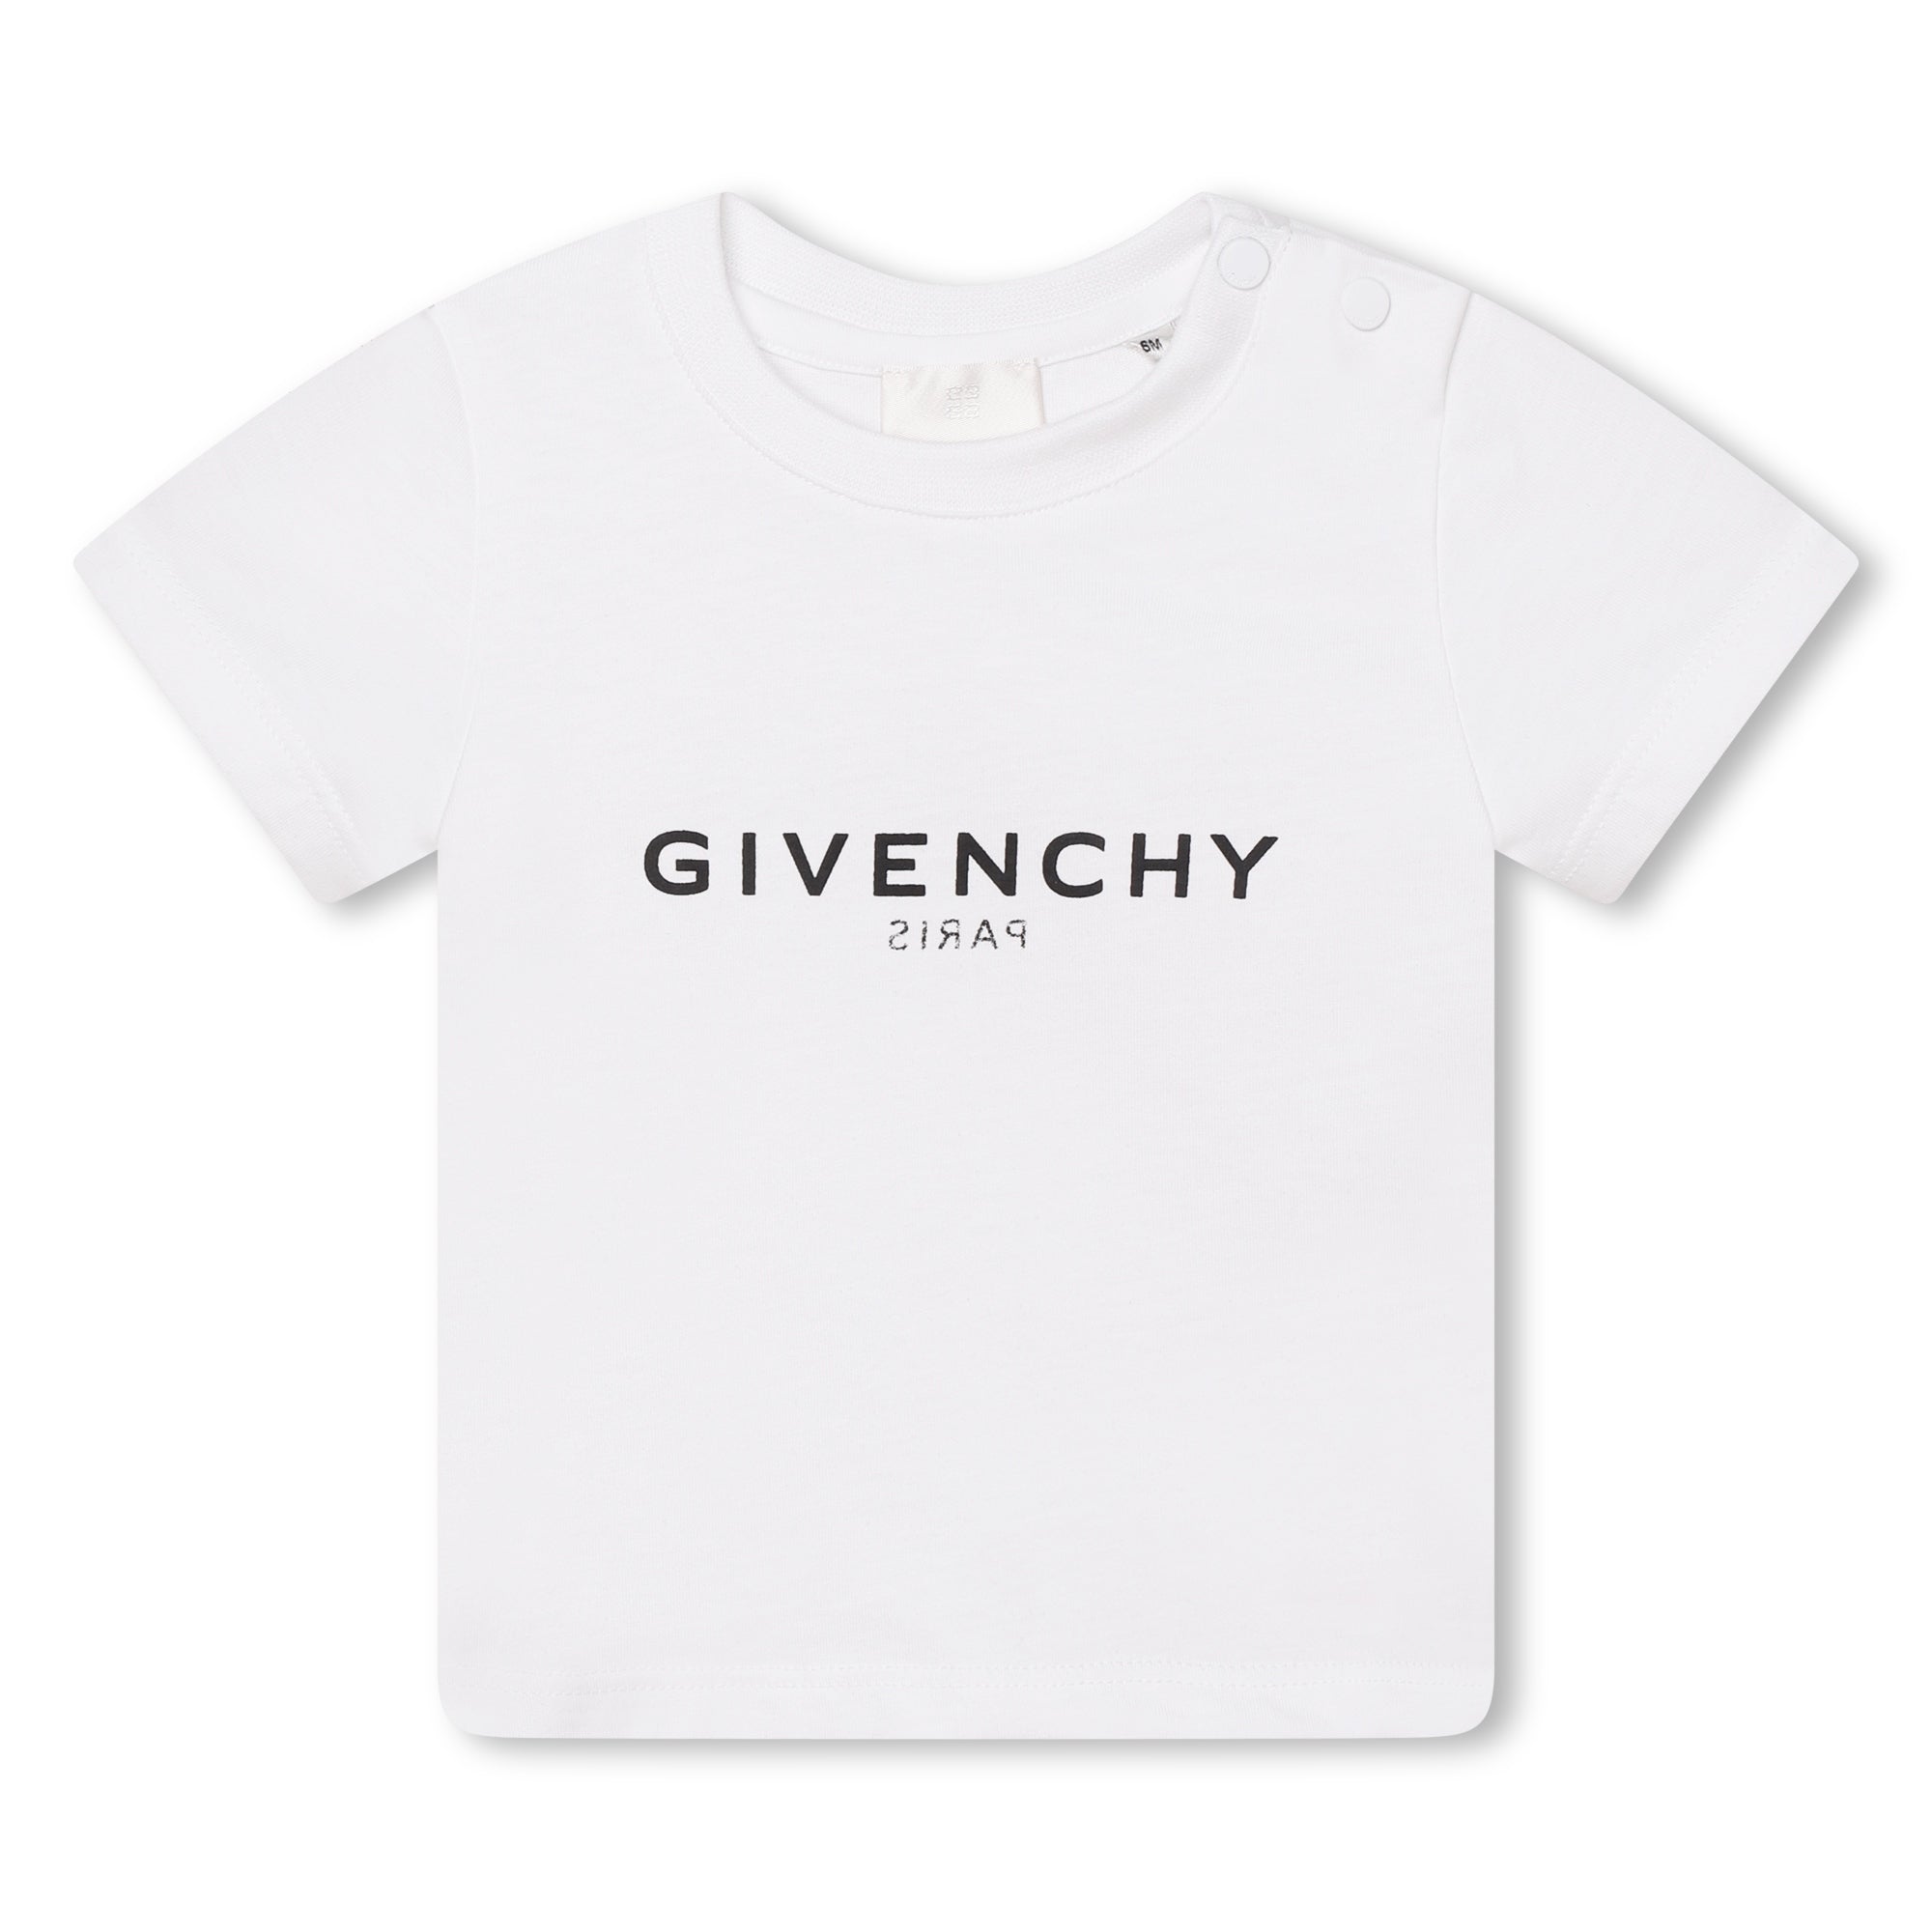 Givenchy Boys Classic T-shirt in Black